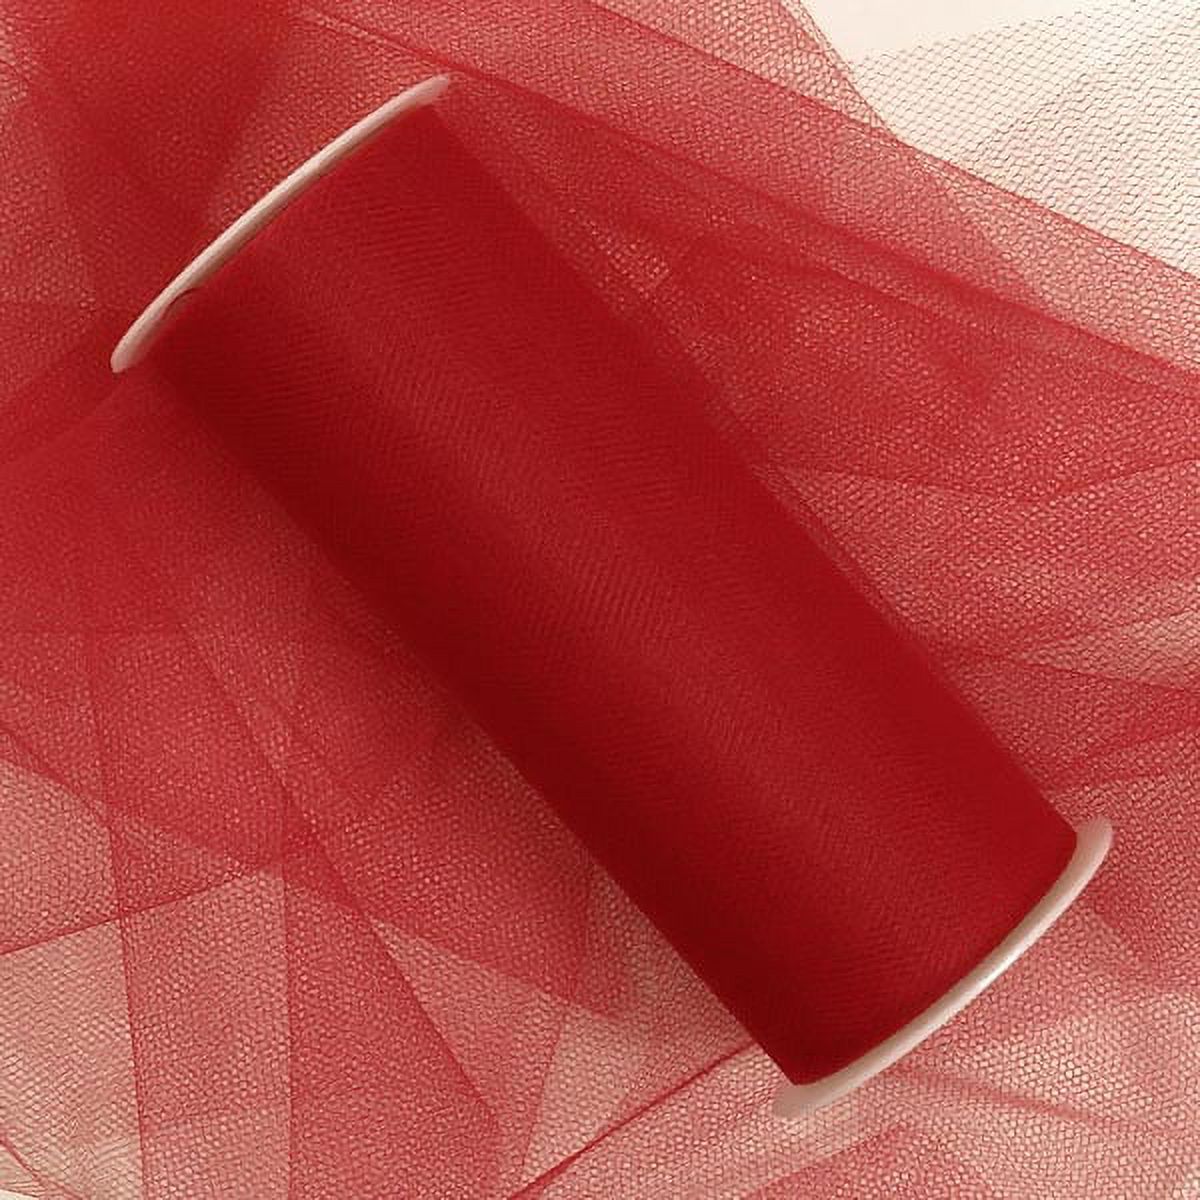 Red Tulle Rolls 18 X 25 Yards by Paper Mart